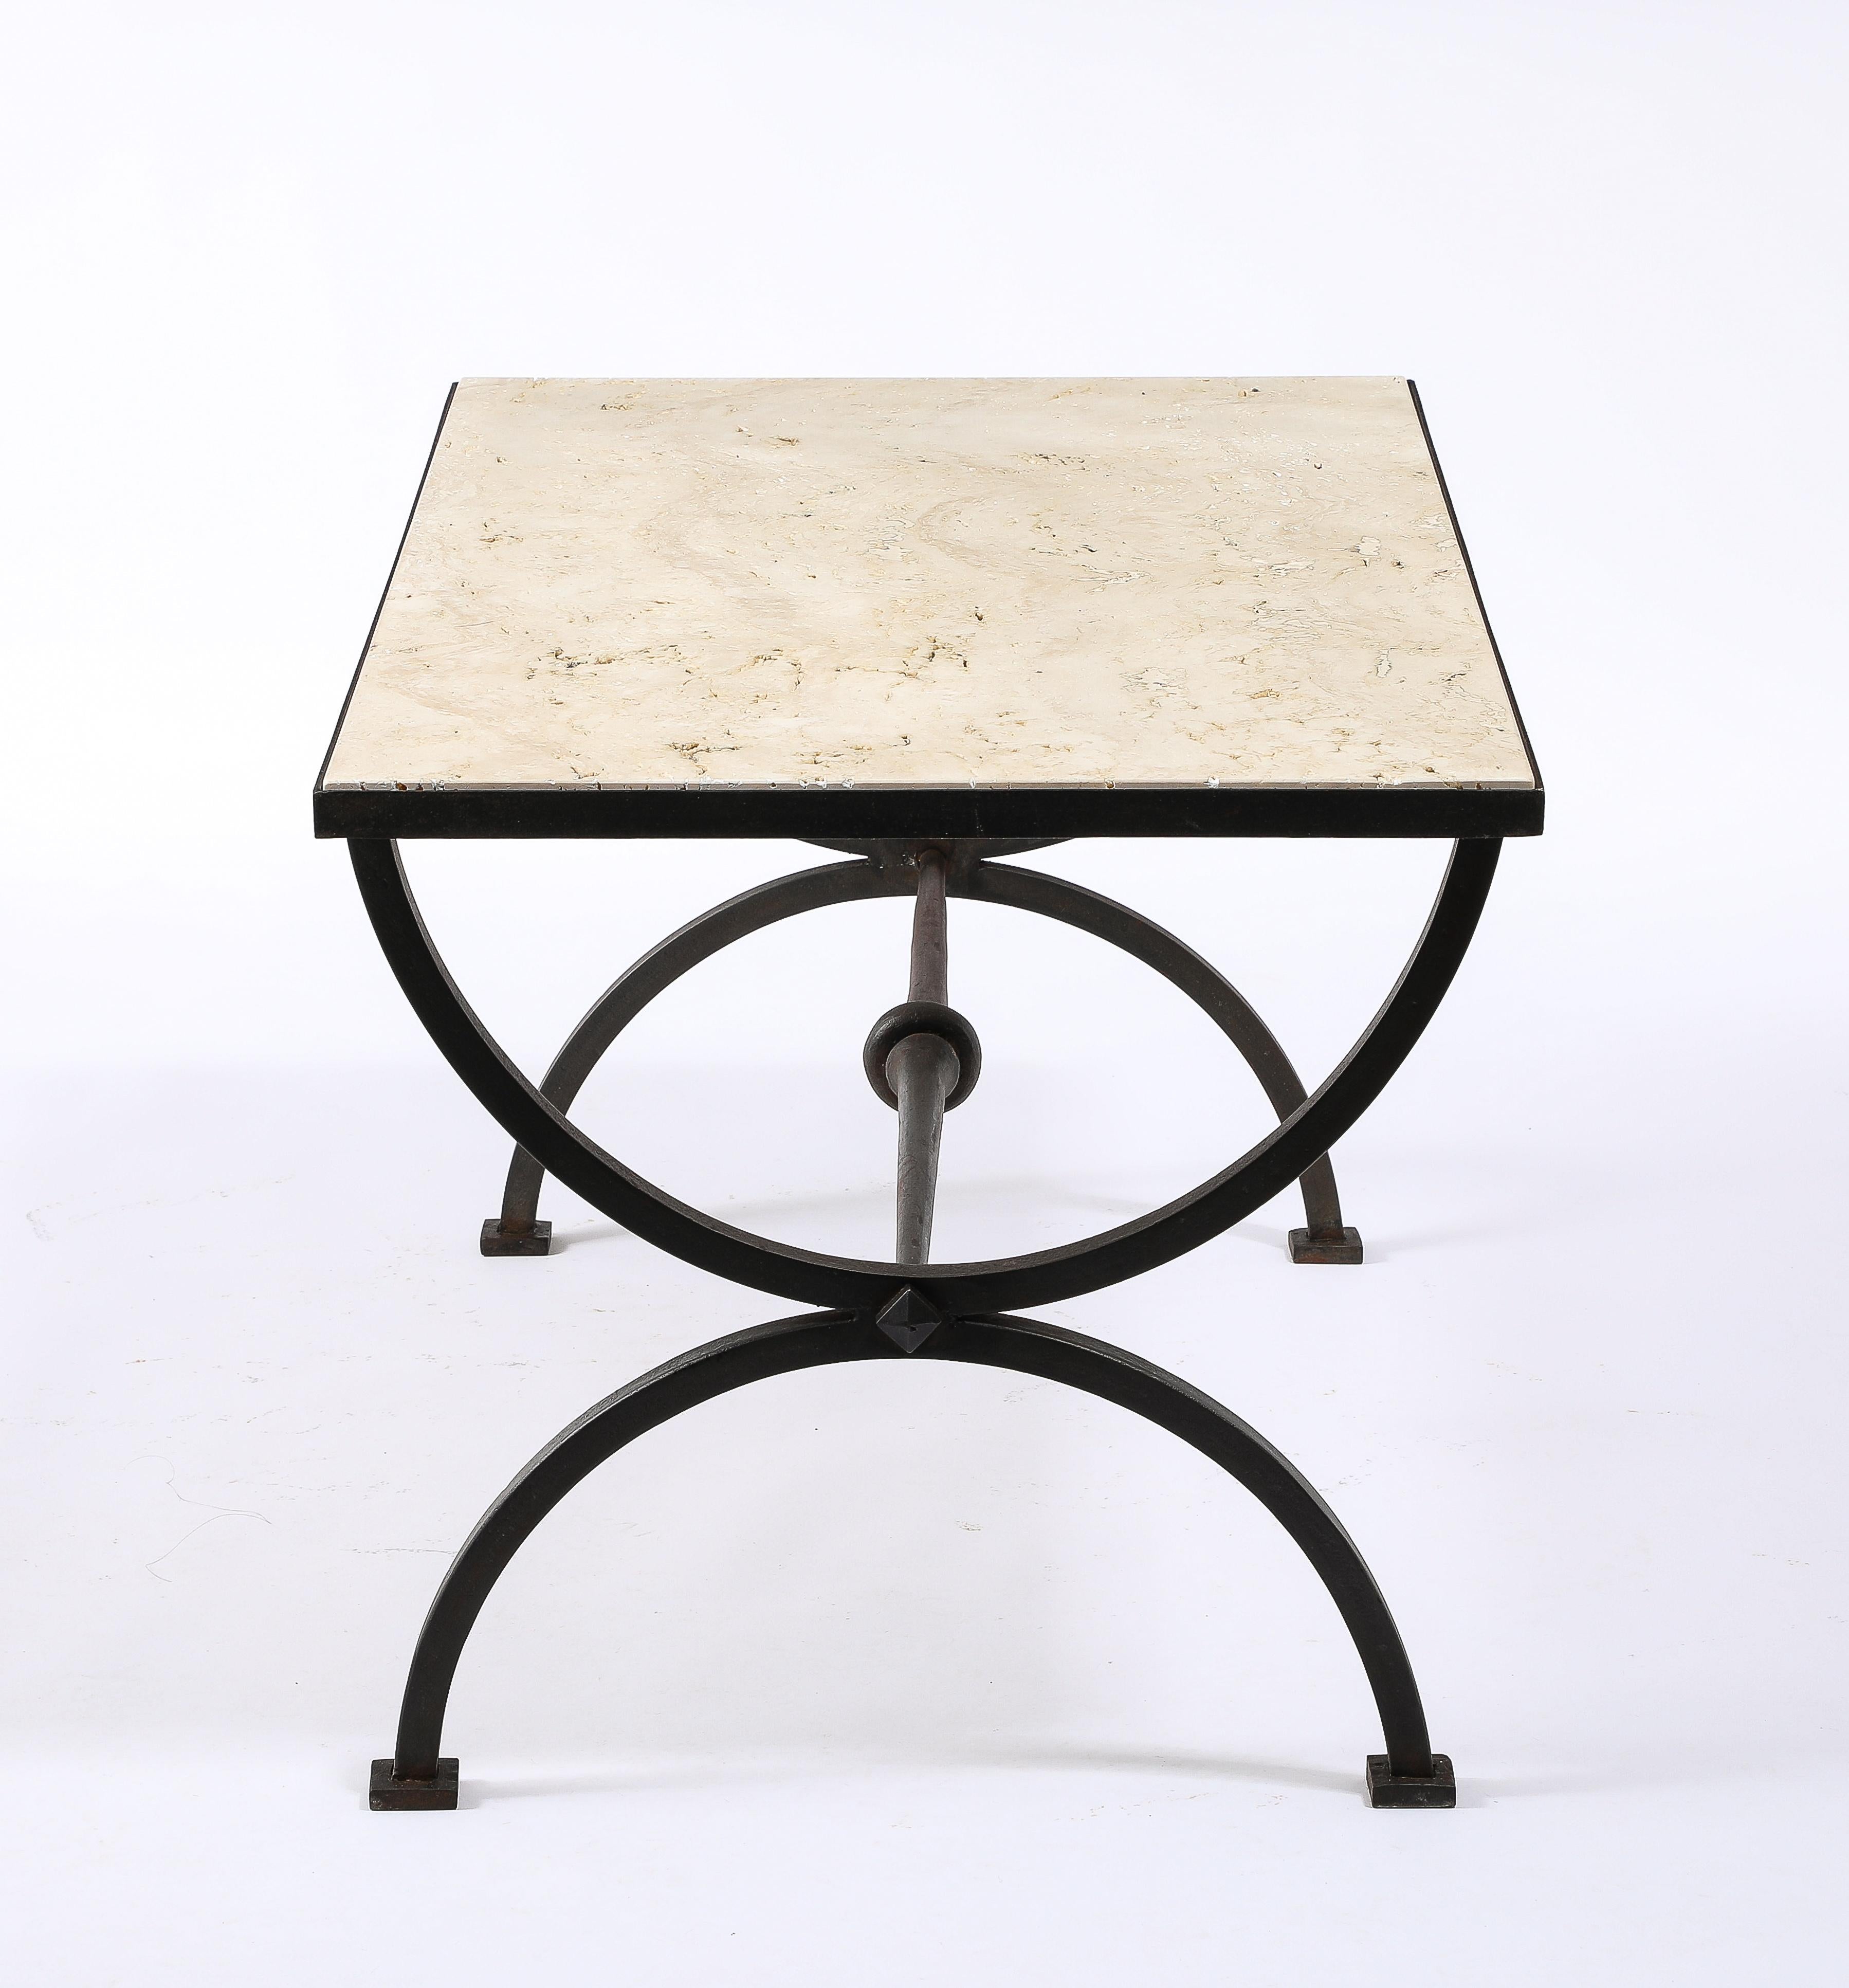 Travertin Marble & Wrought Iron Coffee Table, France 1940's For Sale 1